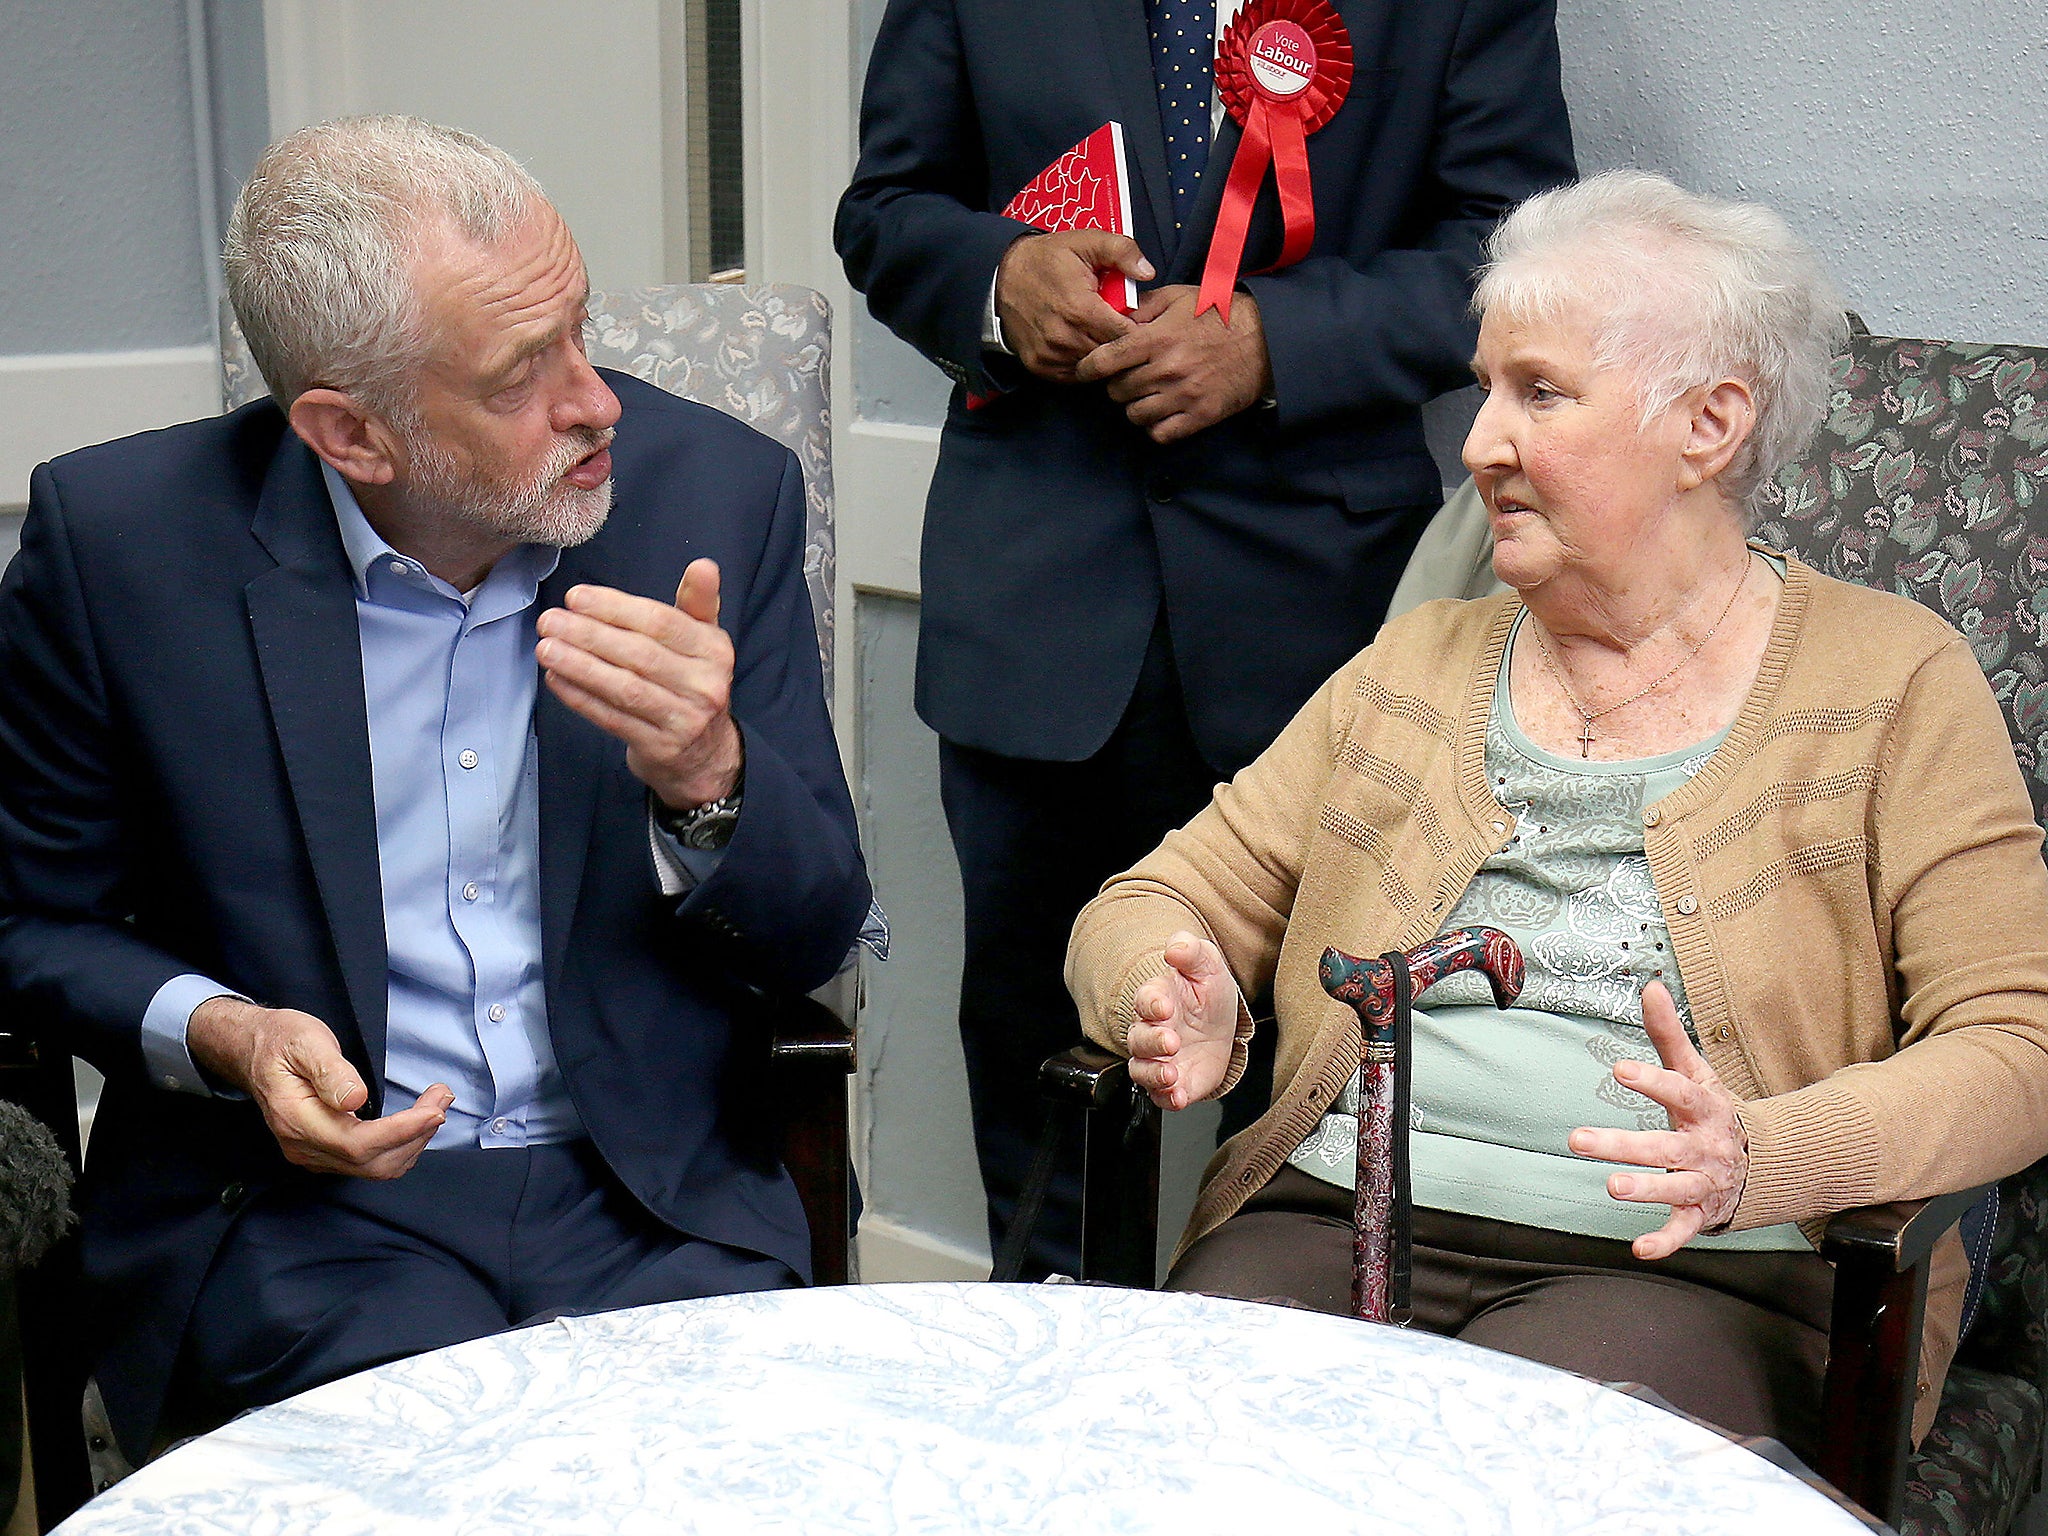 Jeremy Corbyn visits a community hub for older people in Bedford earlier this month